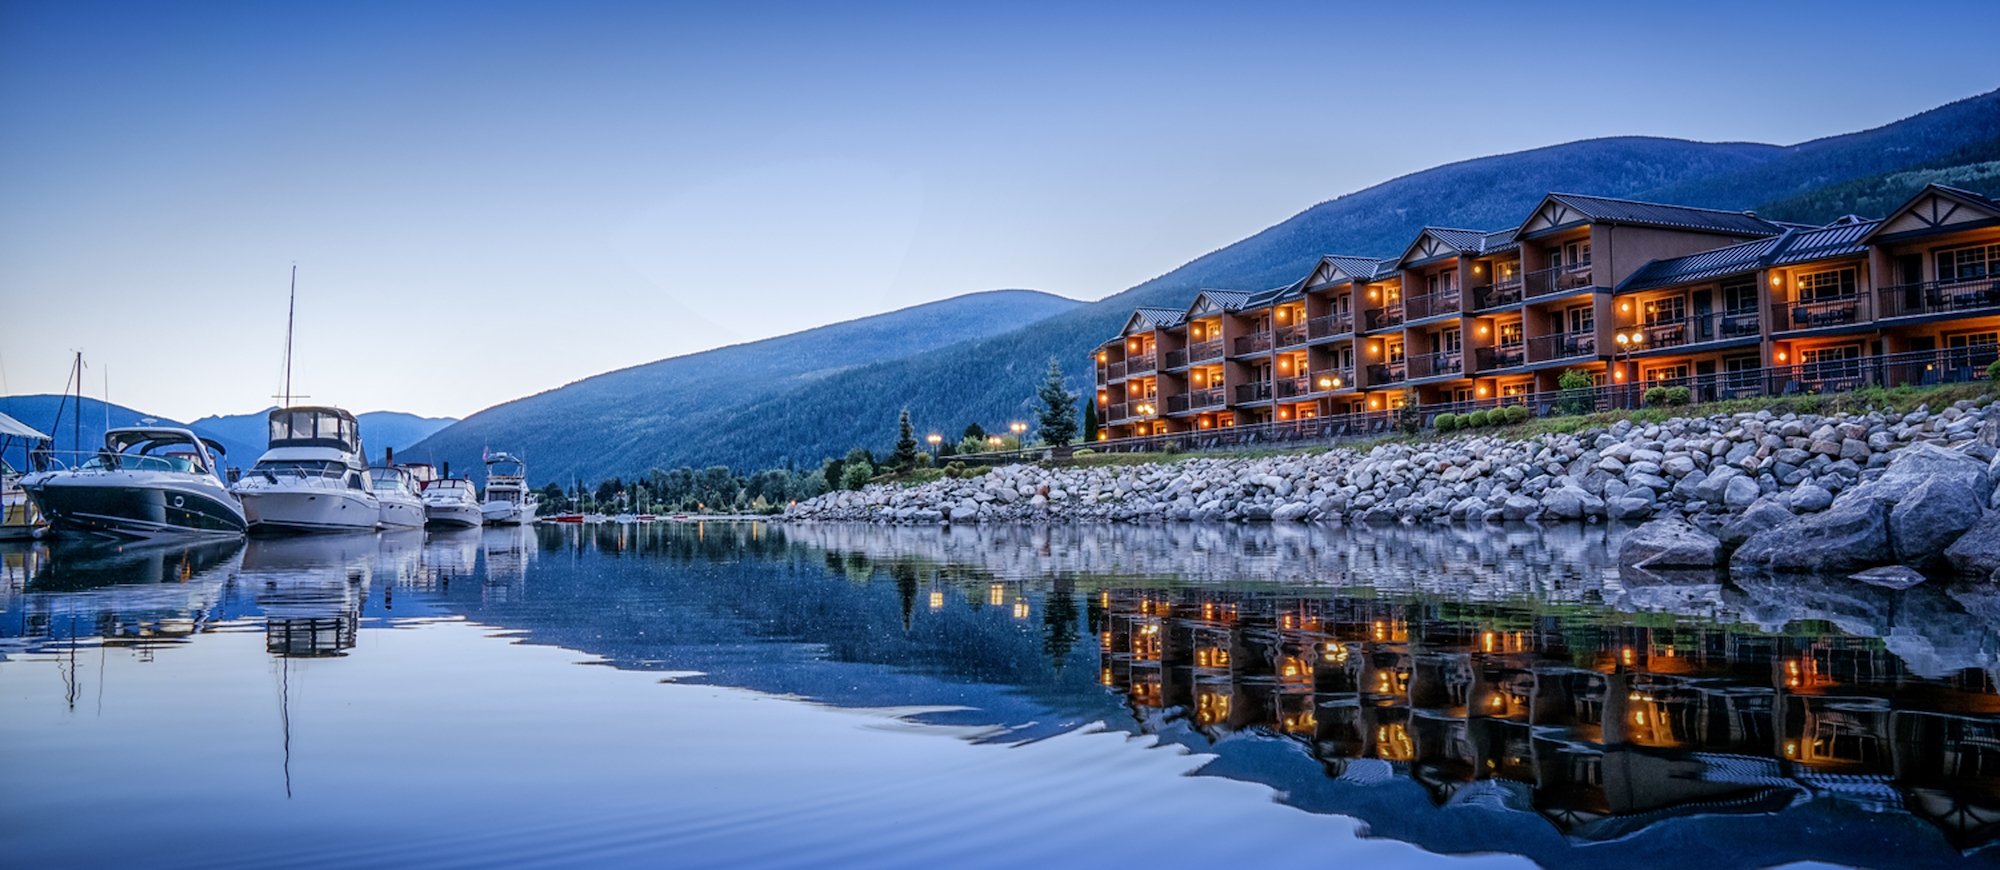 Prestige Lakside Resort situated on Kootenay Lake in Nelson, BC